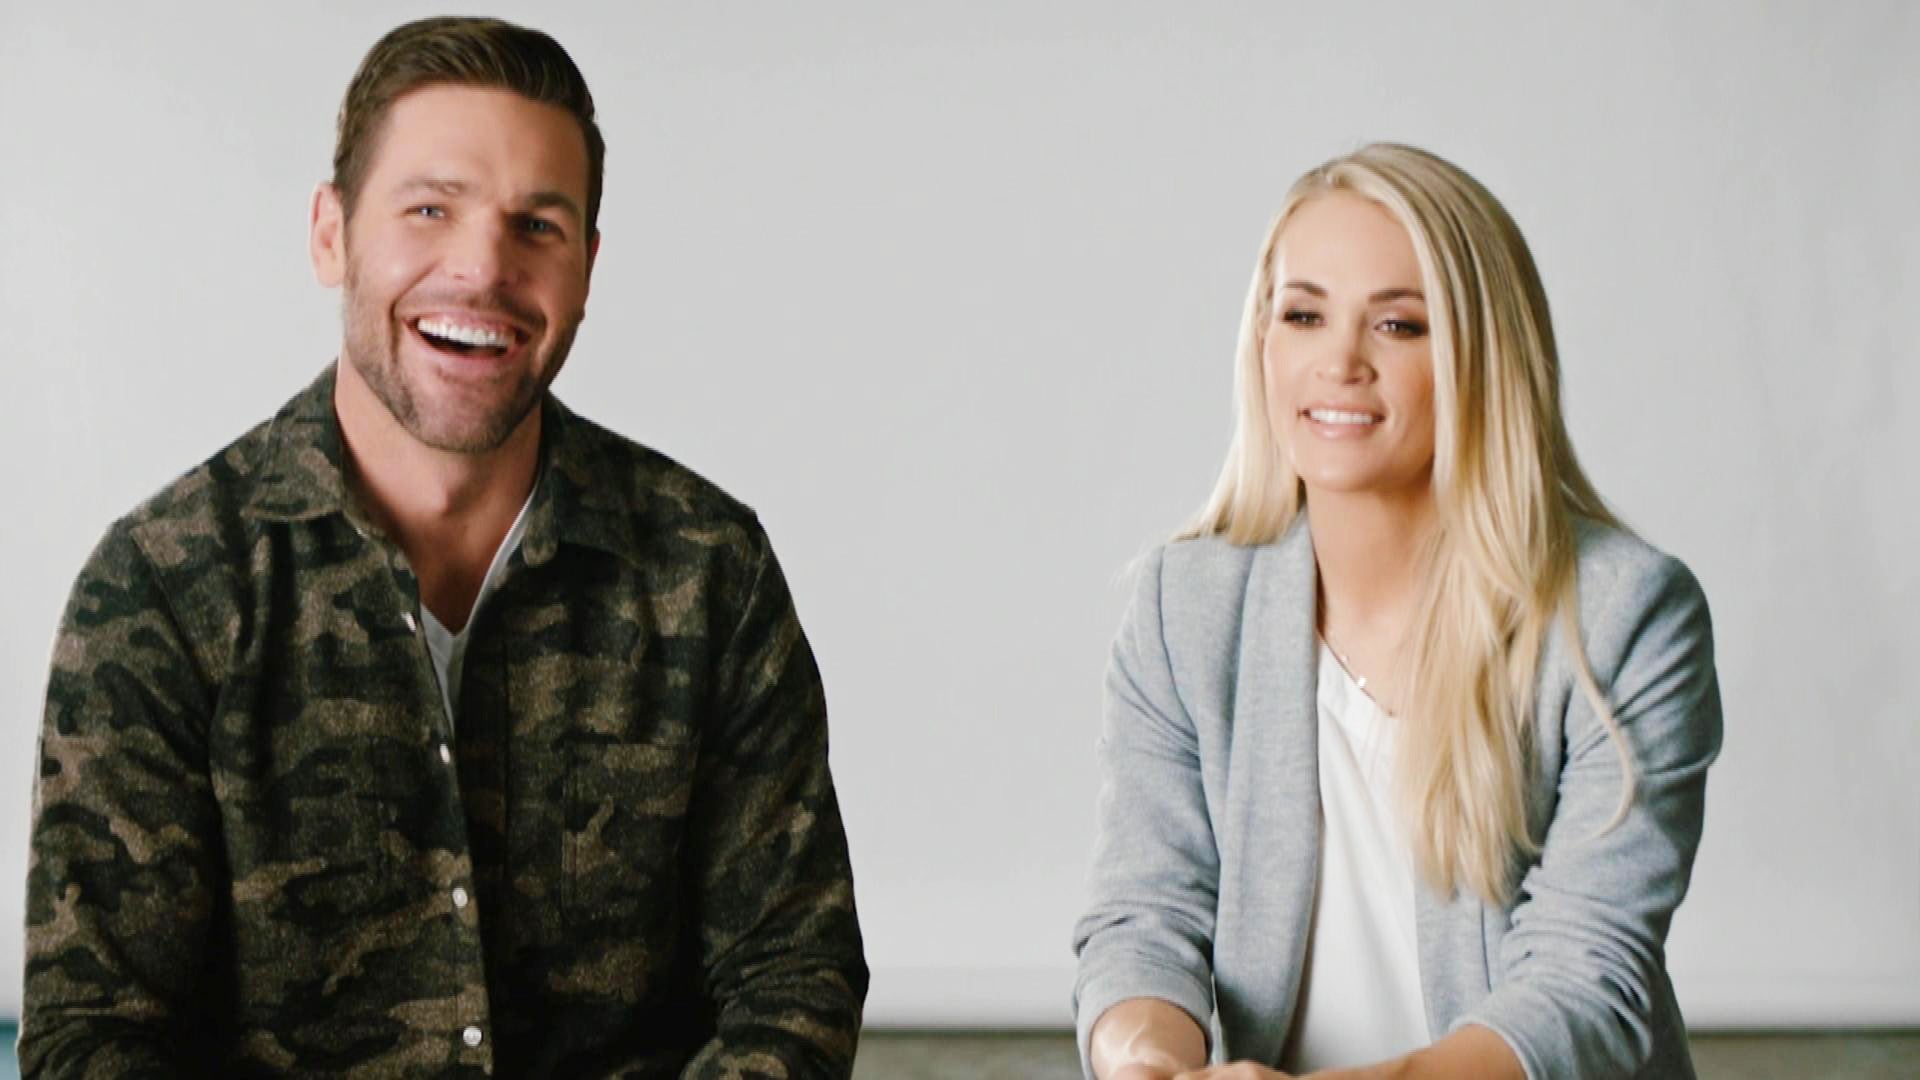 Carrie Underwood and Husband Mike Fisher Relationship Timeline - Parade